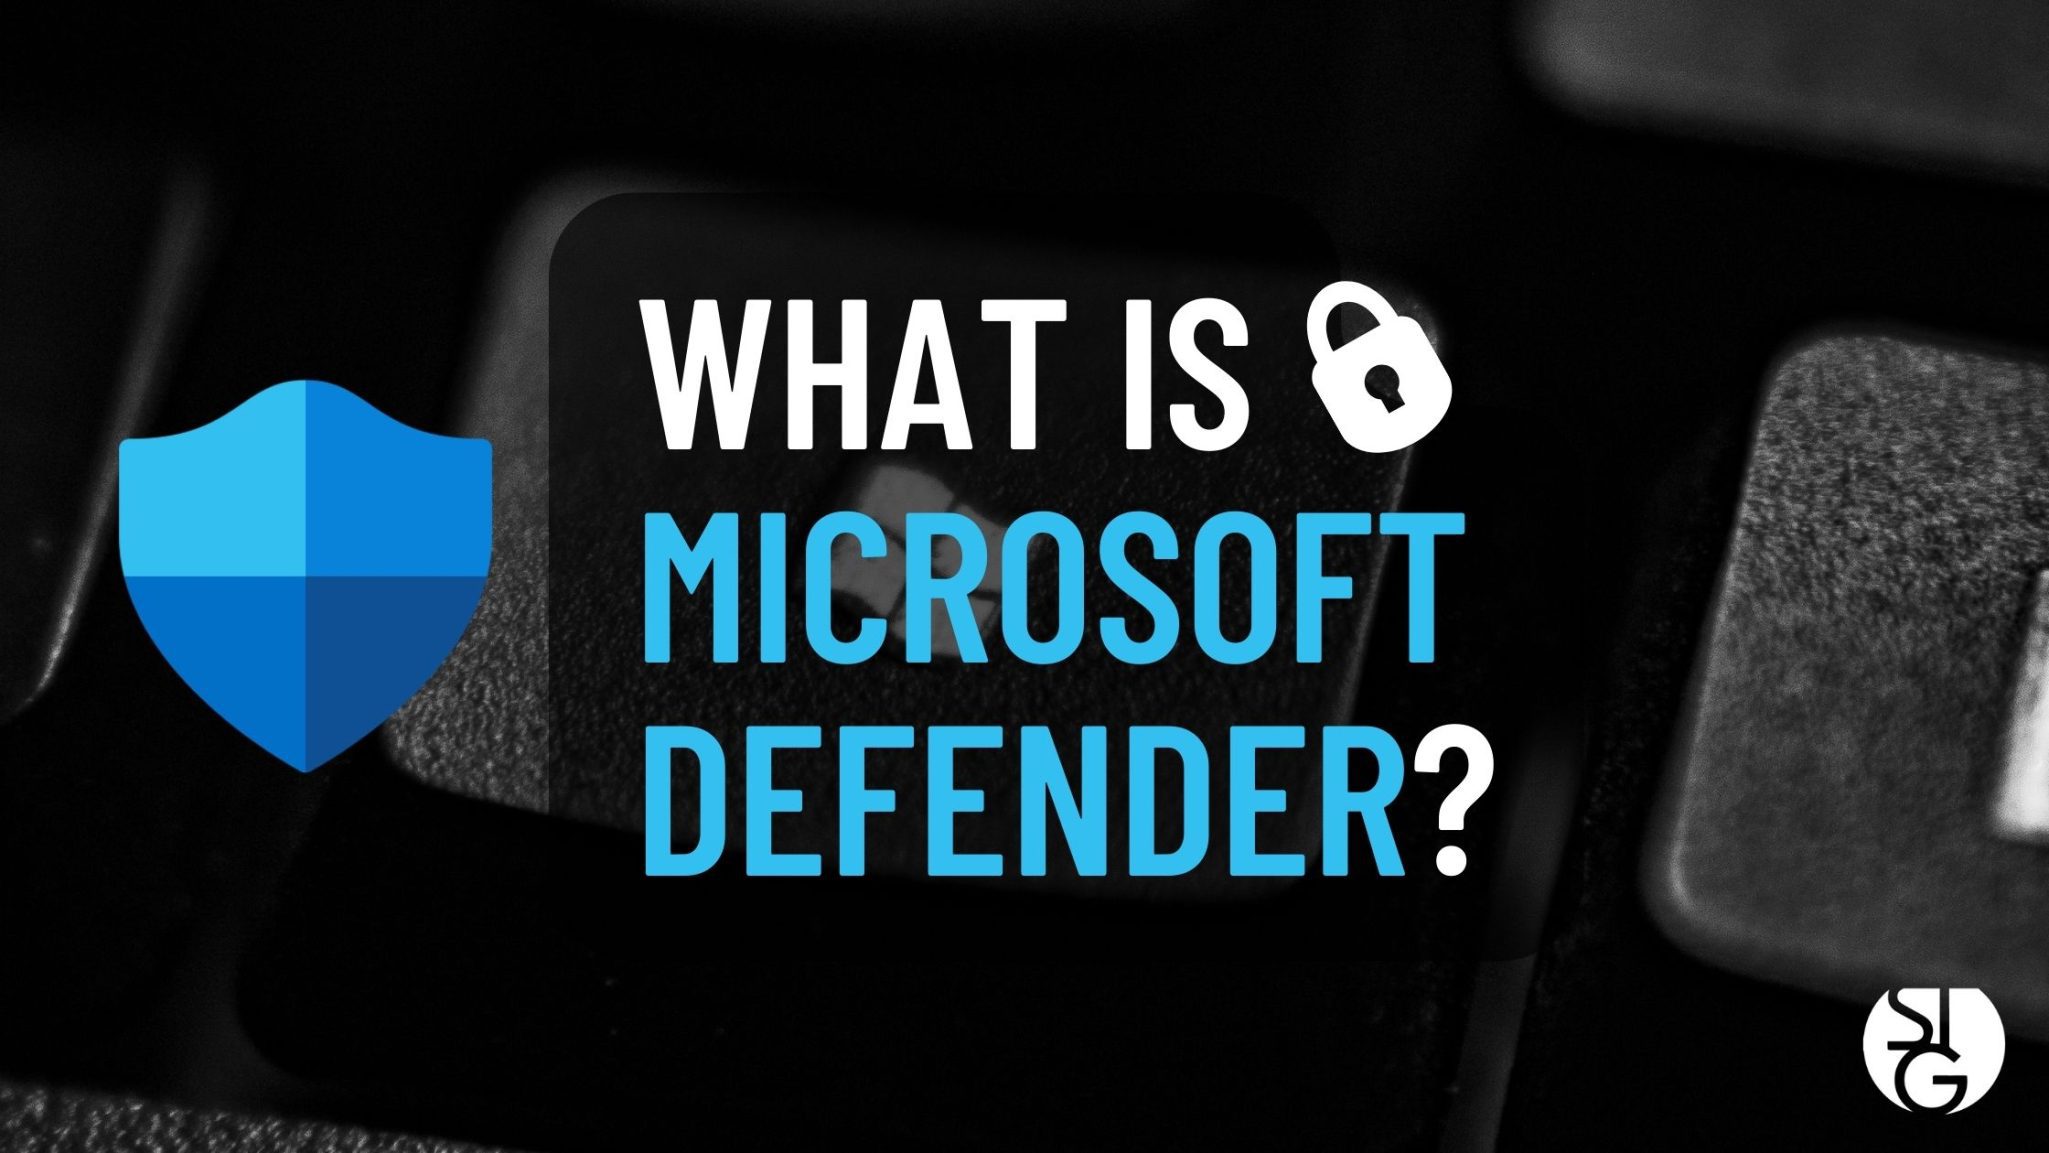 Microsoft Defender for Individuals: What Is It and What Does It Do